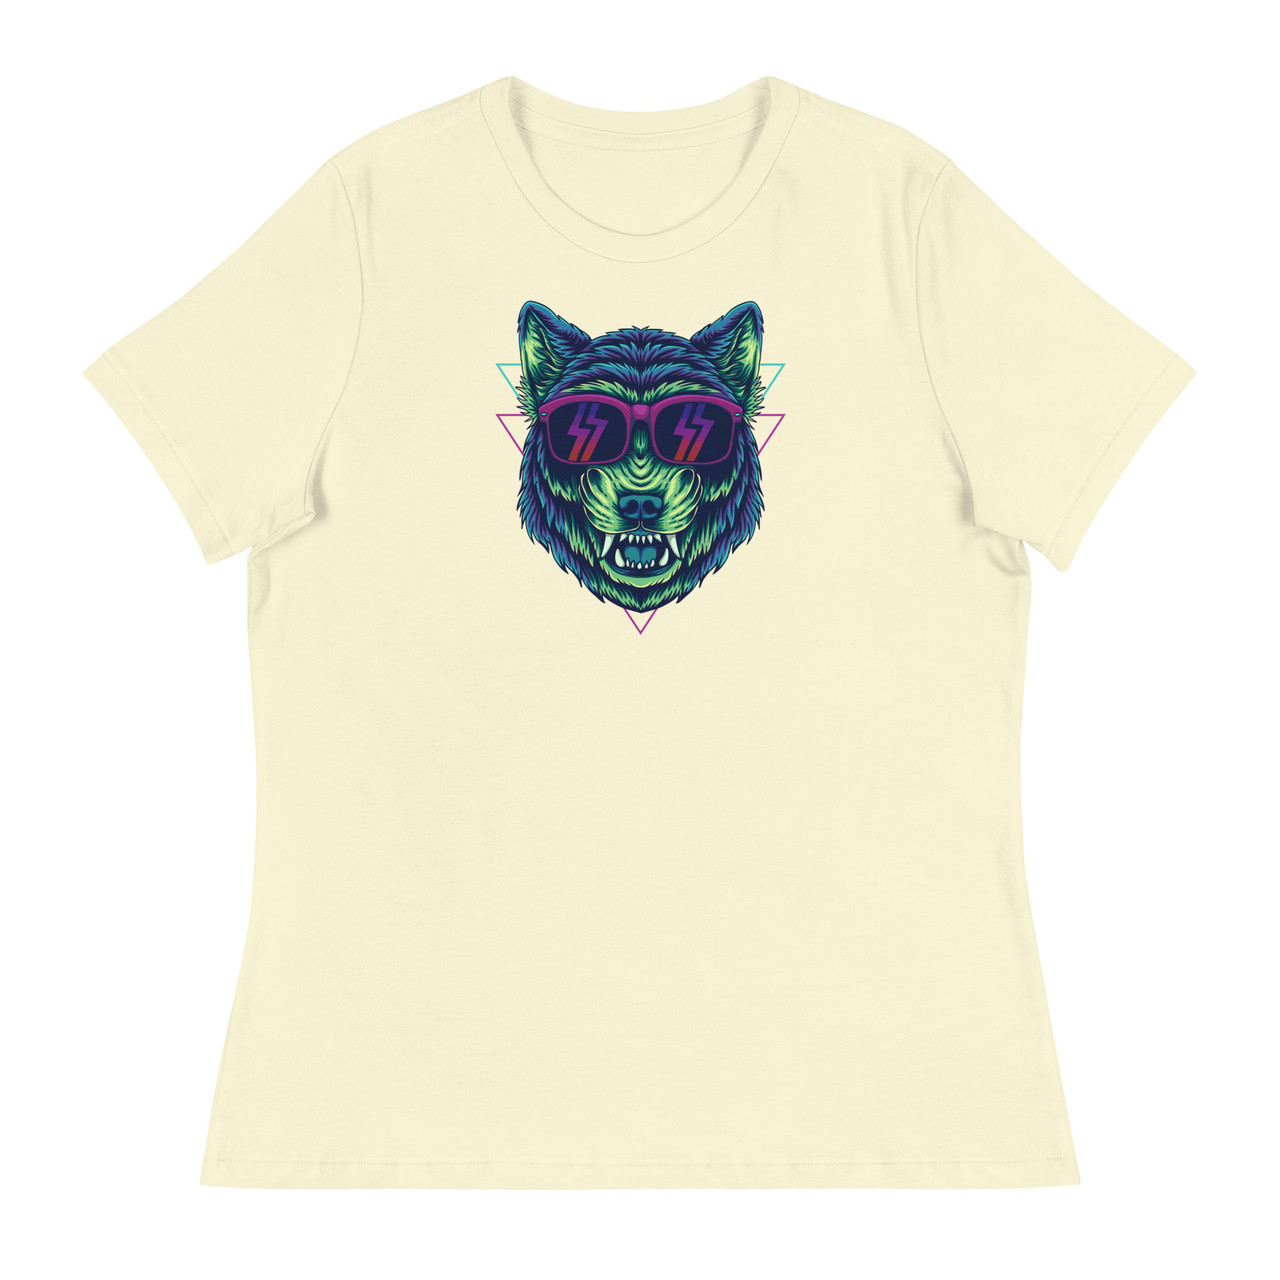 Wolf In Sunglasses Women's Relaxed T-Shirt - Bella + Canvas 6400 